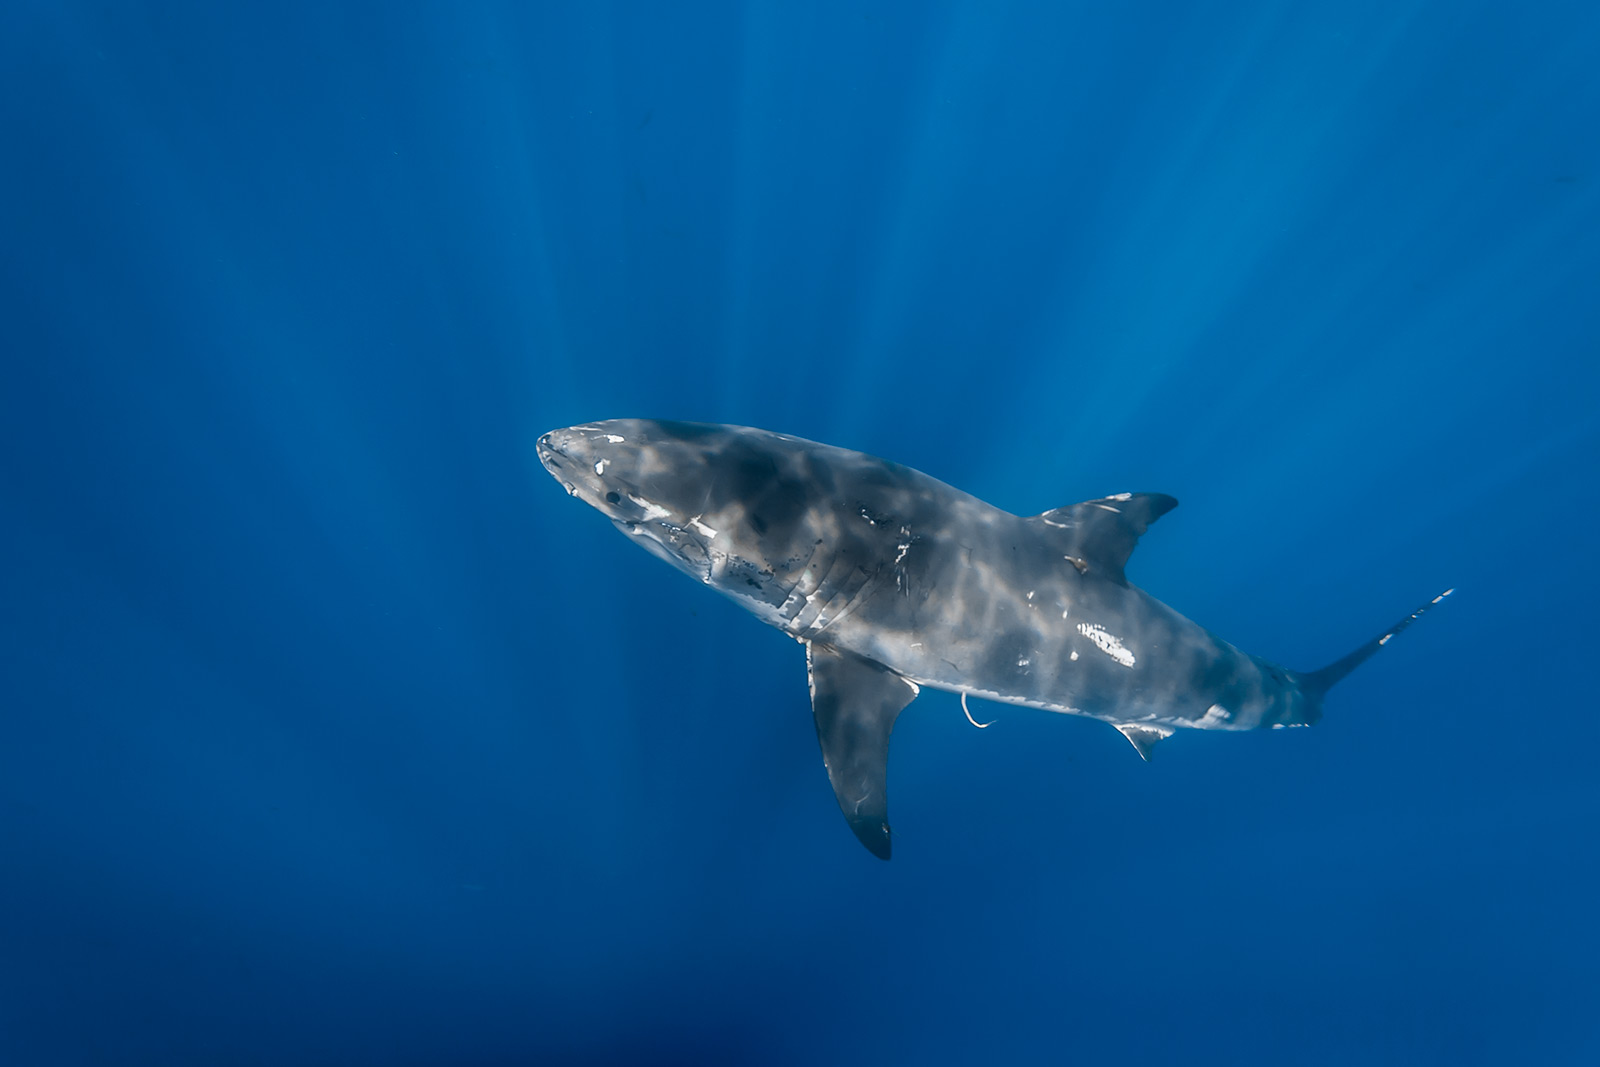 A great white shark covered with scars as seen from above image